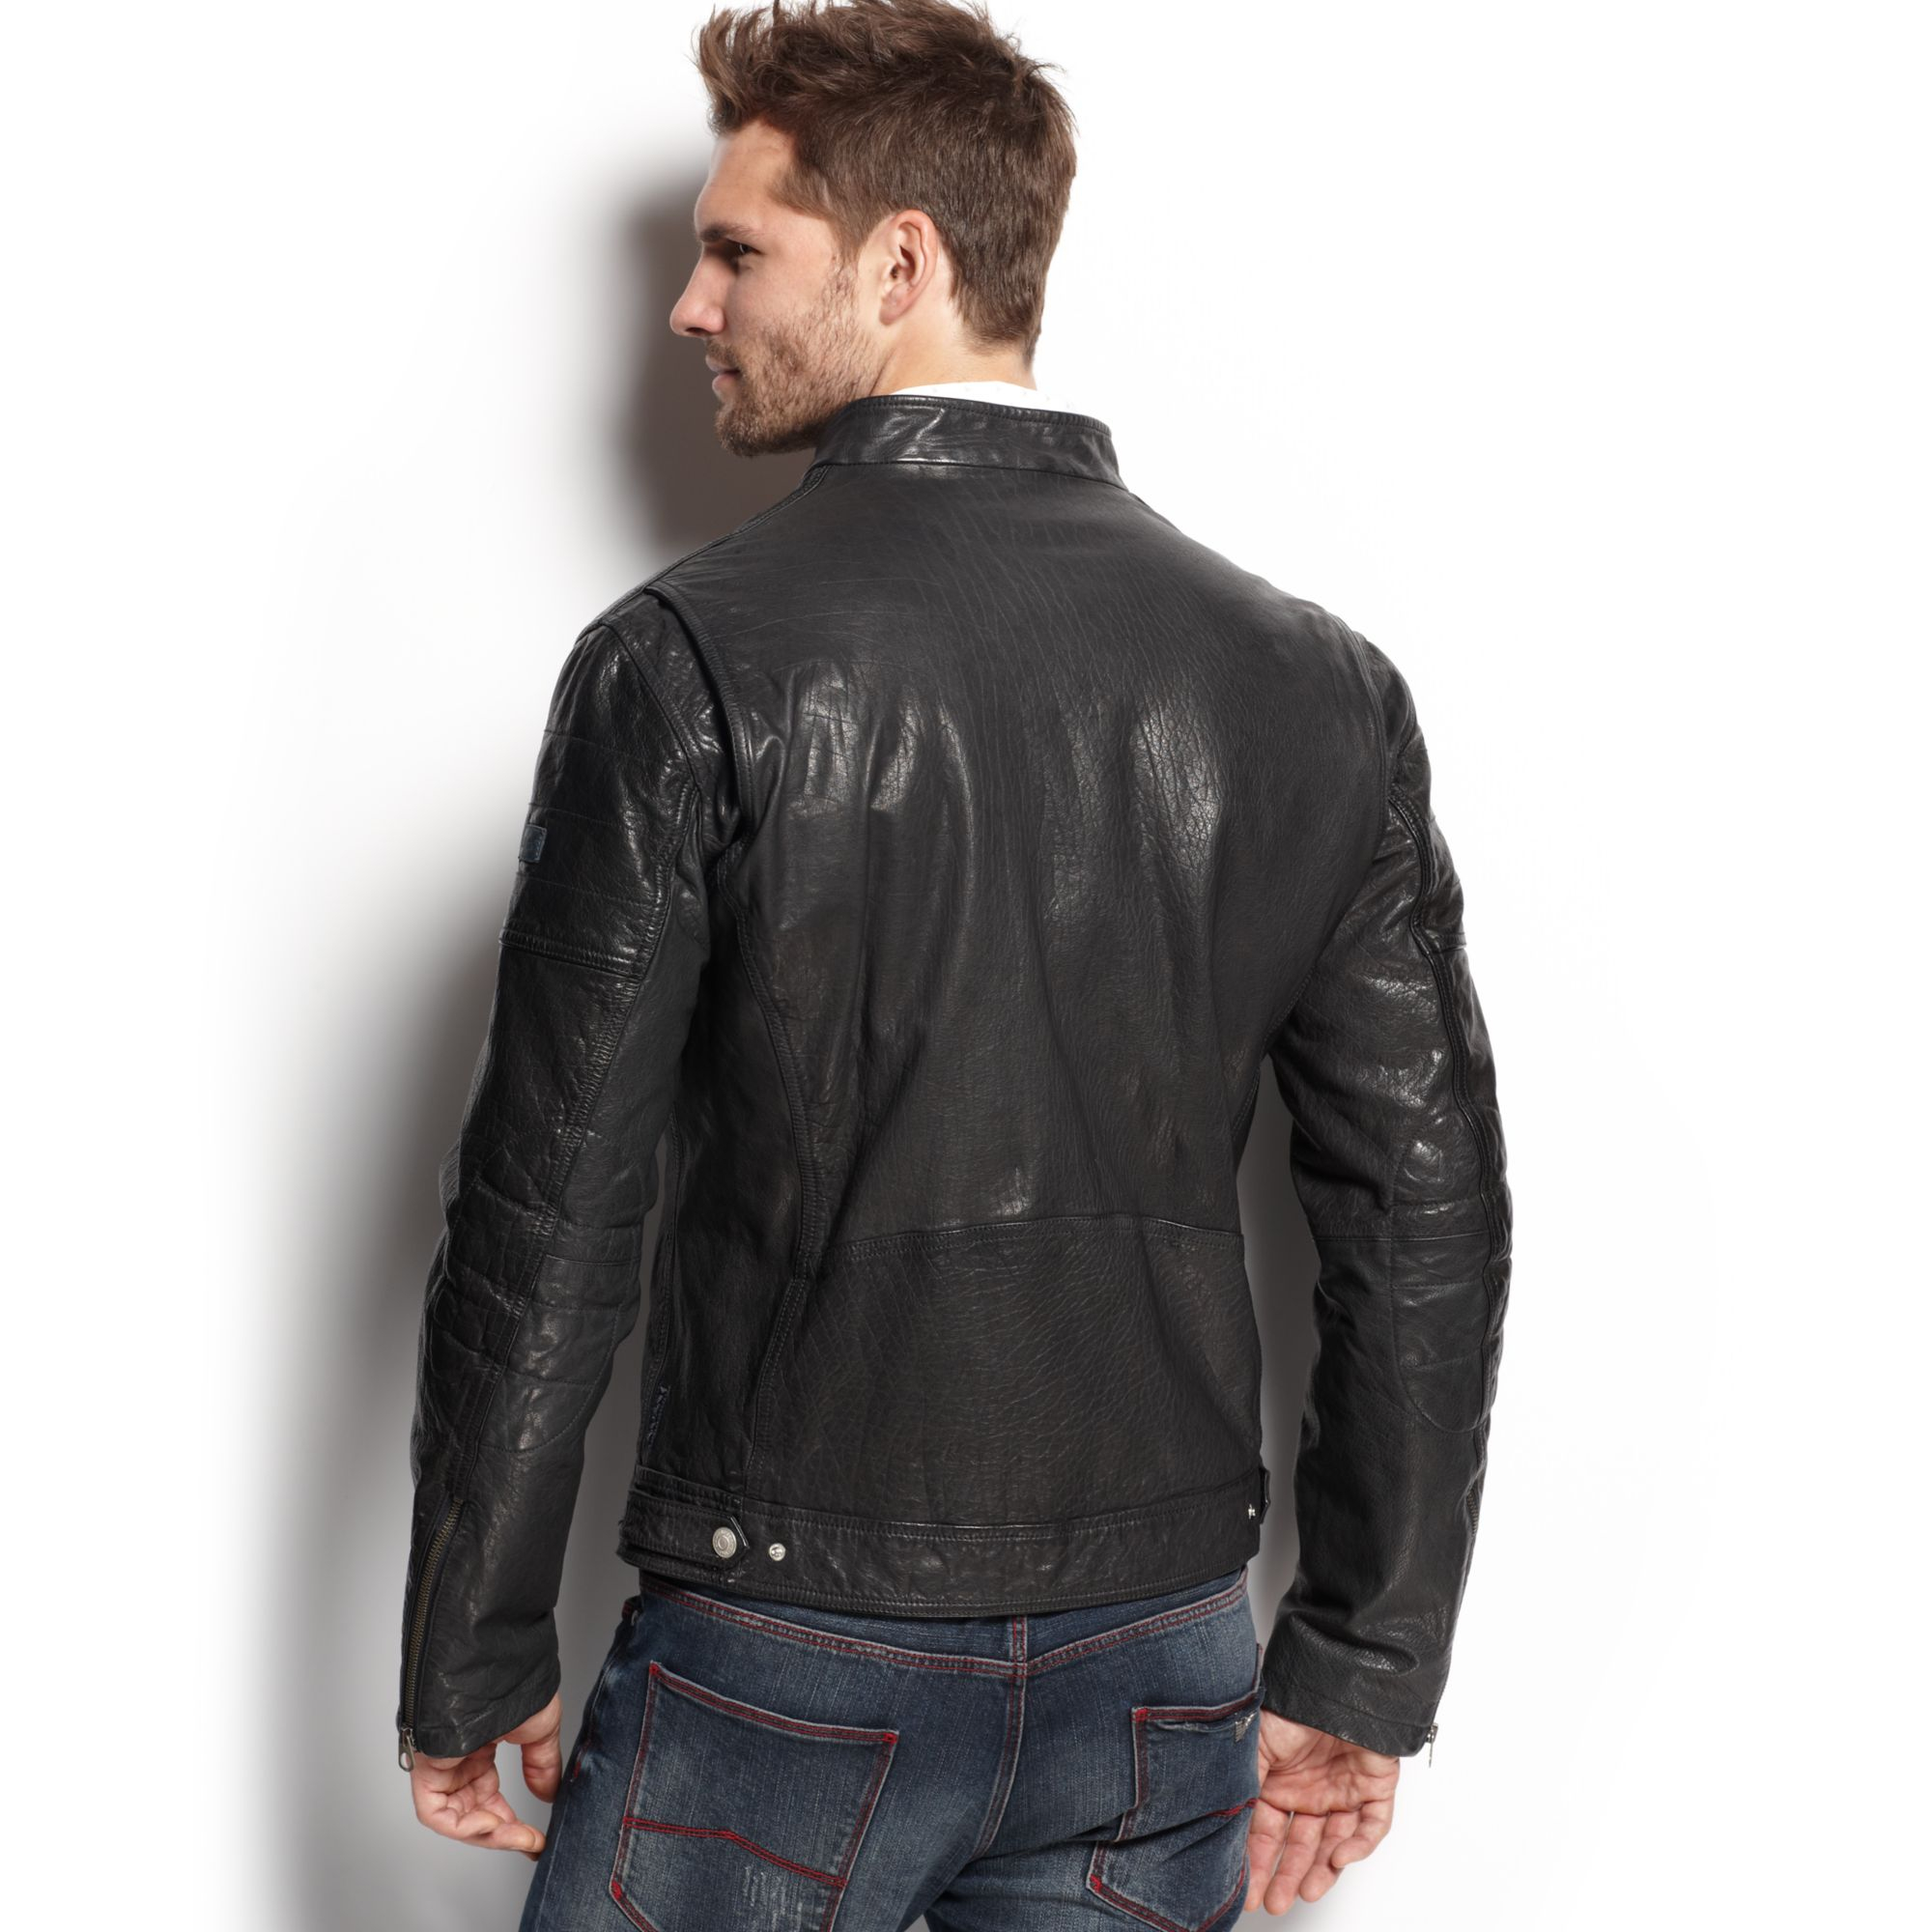 Armani Jeans Leather Bomber Jacket in Black for Men - Lyst